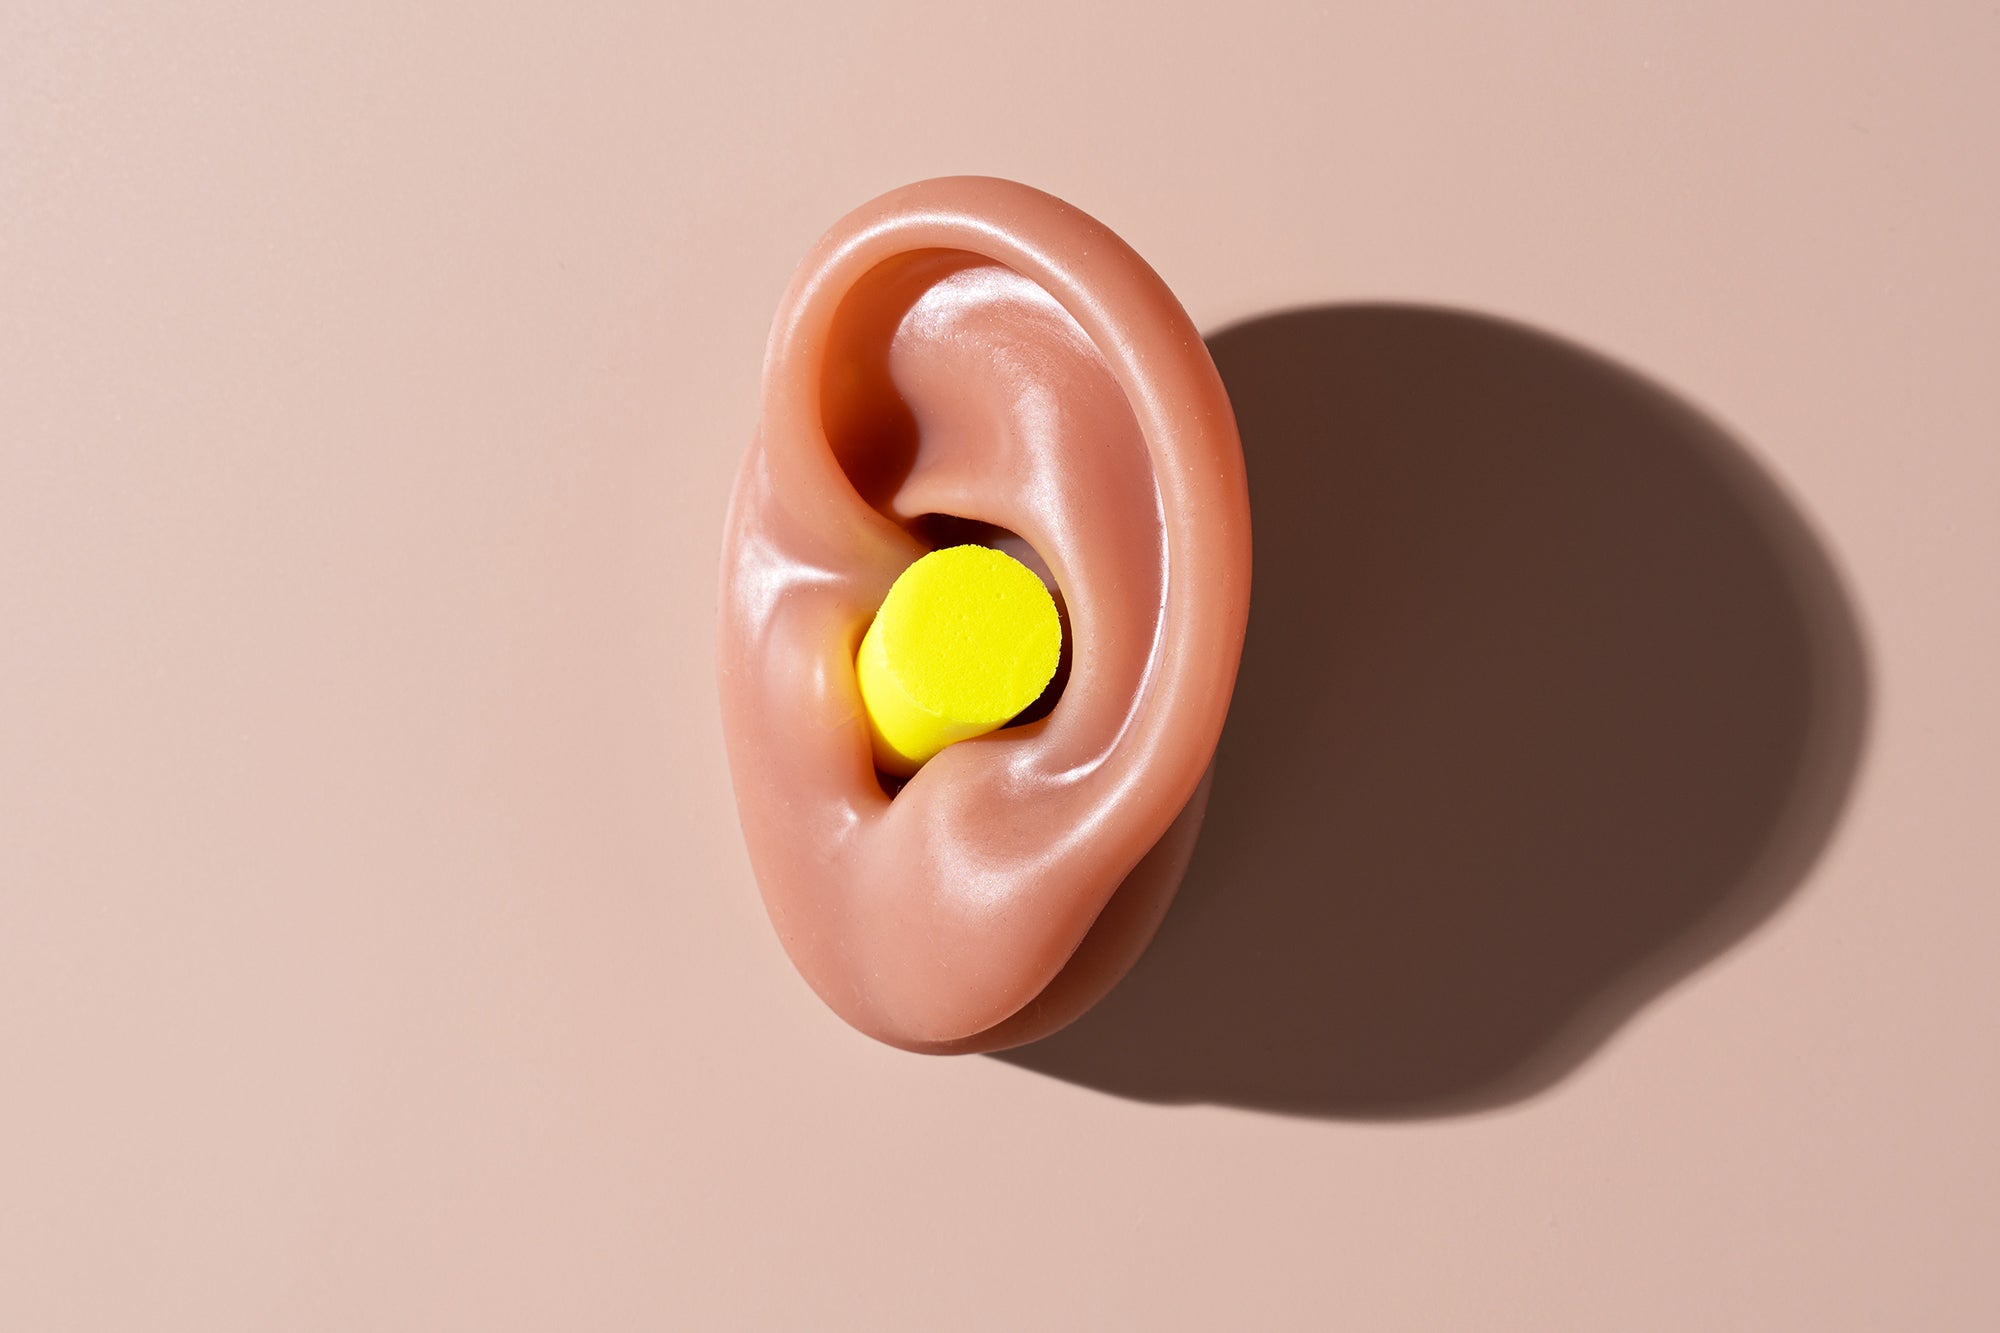 Yellow colored, traditional sound insulation earplug inserted in a 3-D model of a human ear on a brown surface with high-key lighting and a sharp, dark shadow